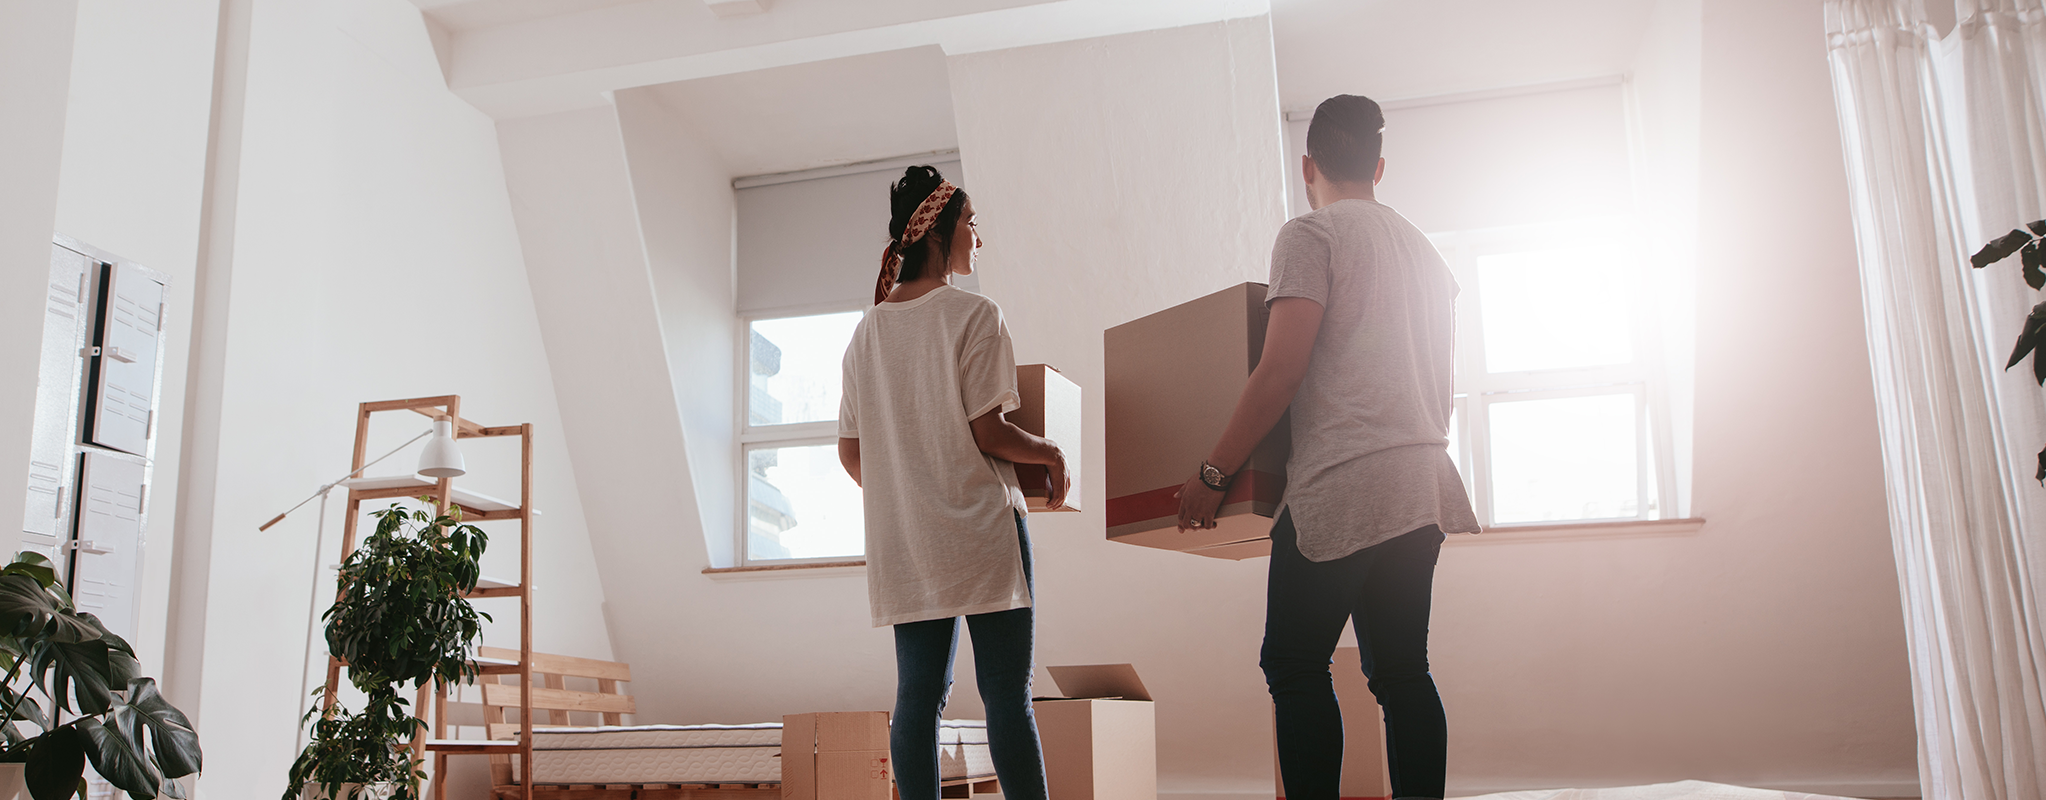 Over Half of Couples Would Charge Their S.O Rent